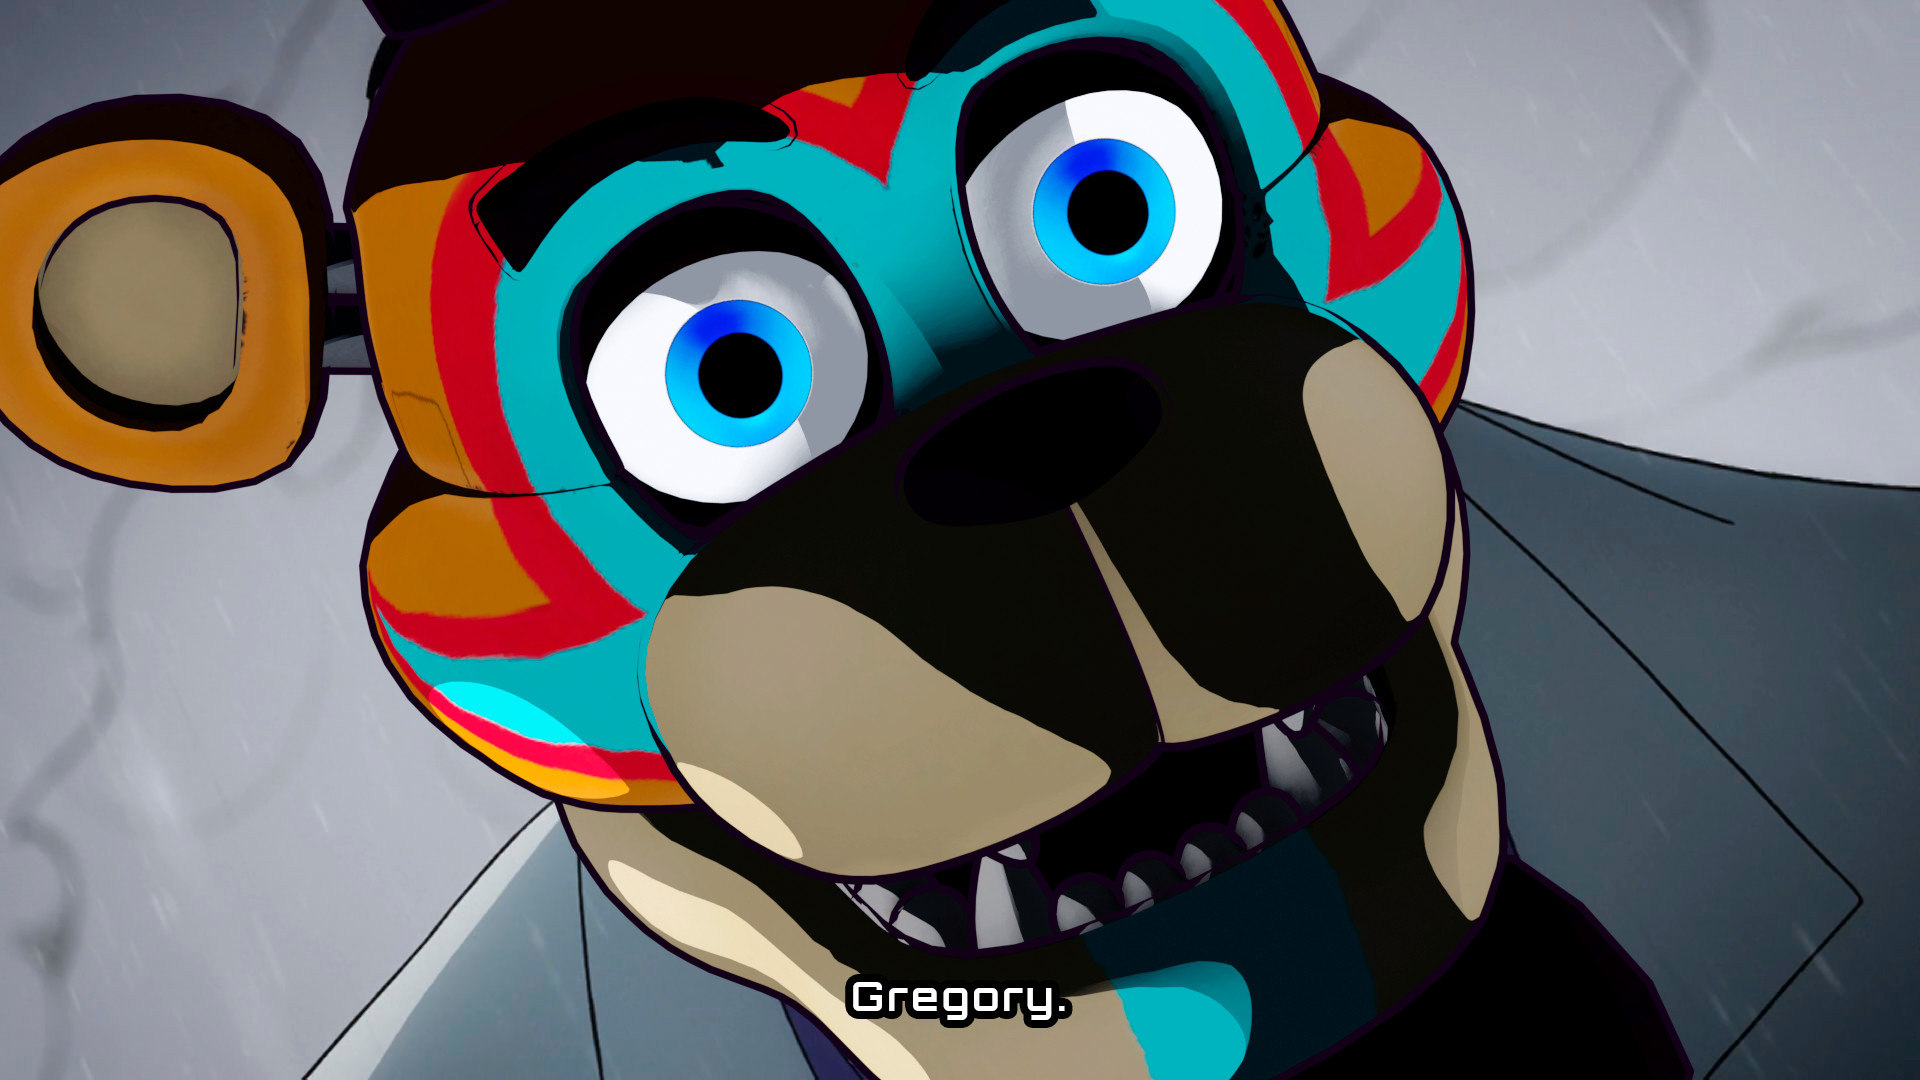 Gregory is REALLY crying for help.., Five Nights at Freddy's: Security  Breach